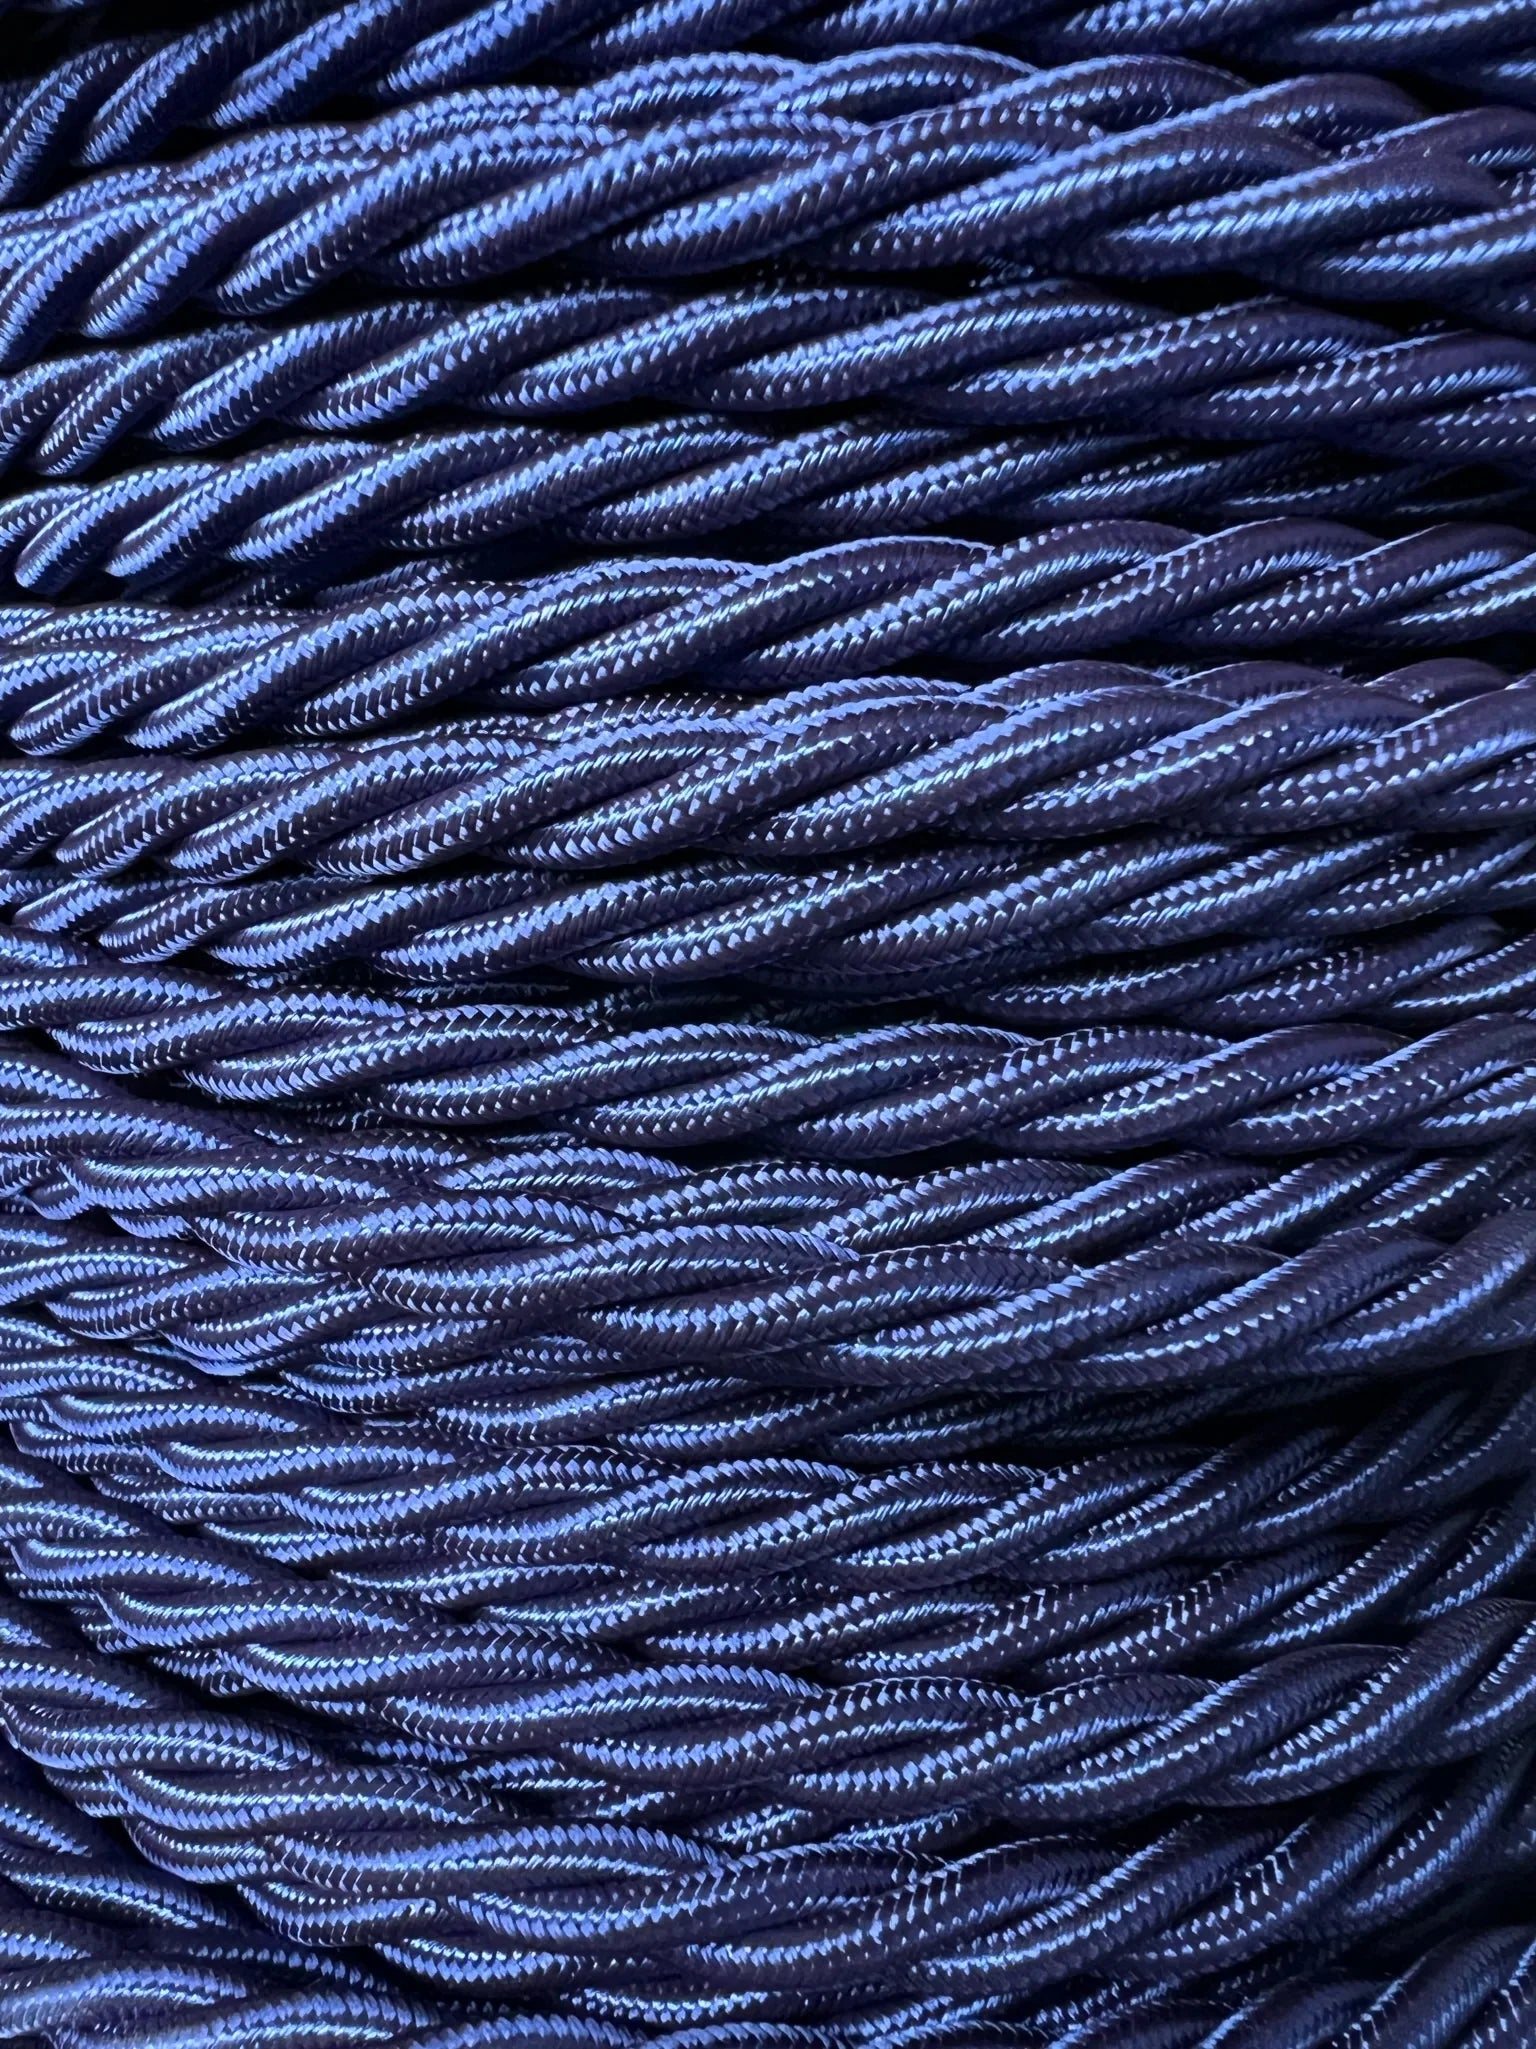 Indigo + Black - Lola's Leads Fabric Extension Cable